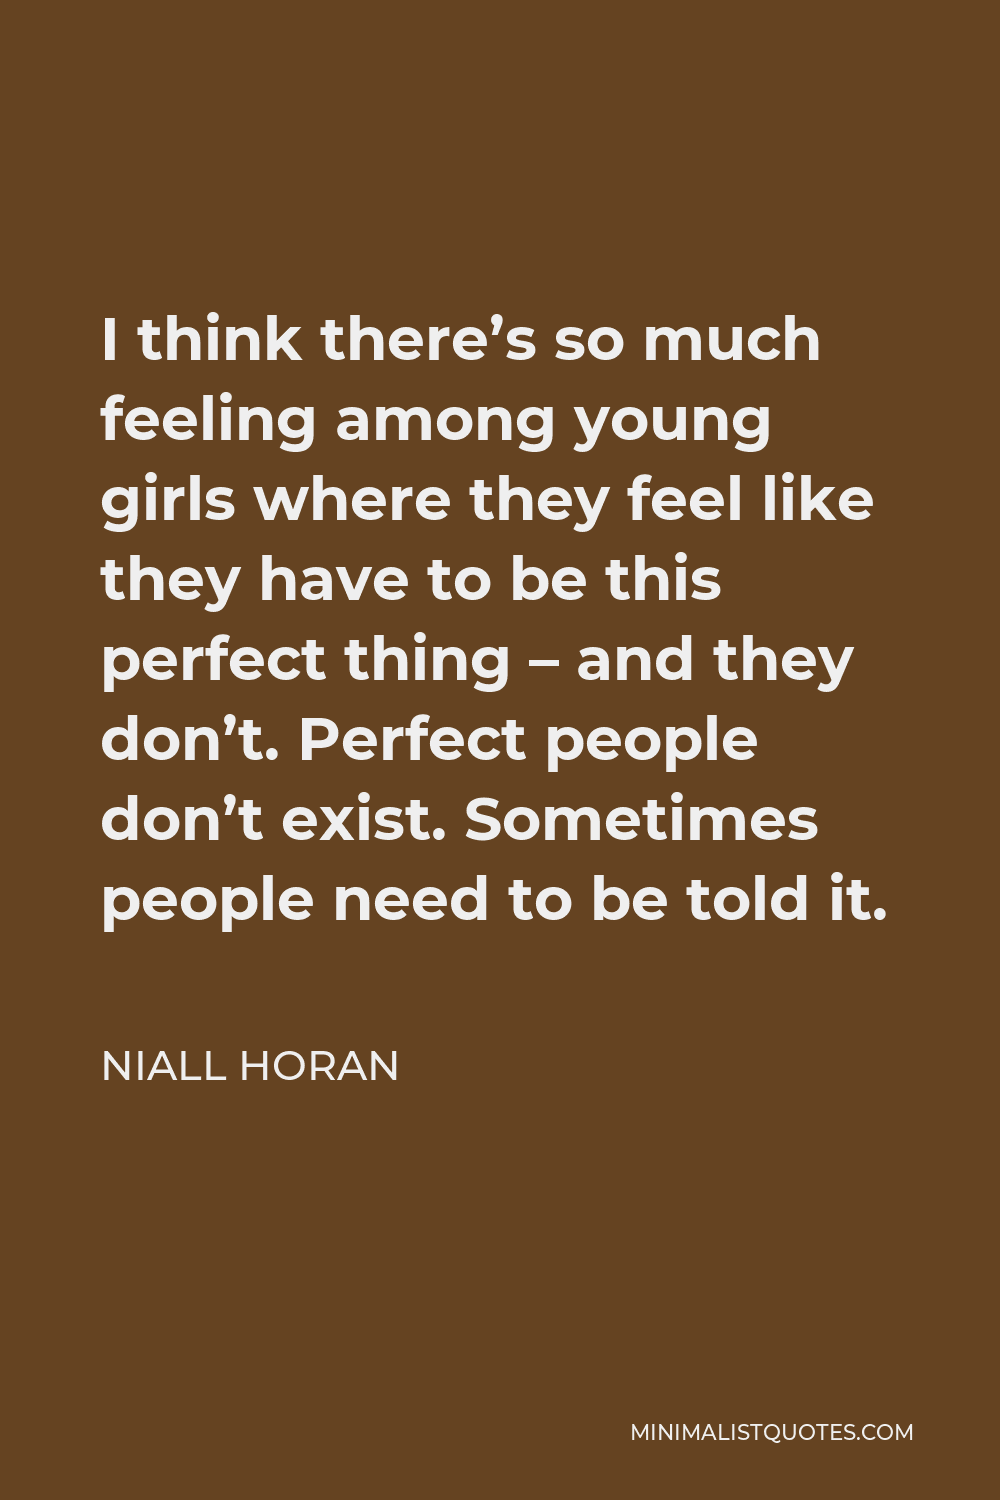 Niall Horan Quote - I think there’s so much feeling among young girls where they feel like they have to be this perfect thing – and they don’t. Perfect people don’t exist. Sometimes people need to be told it.